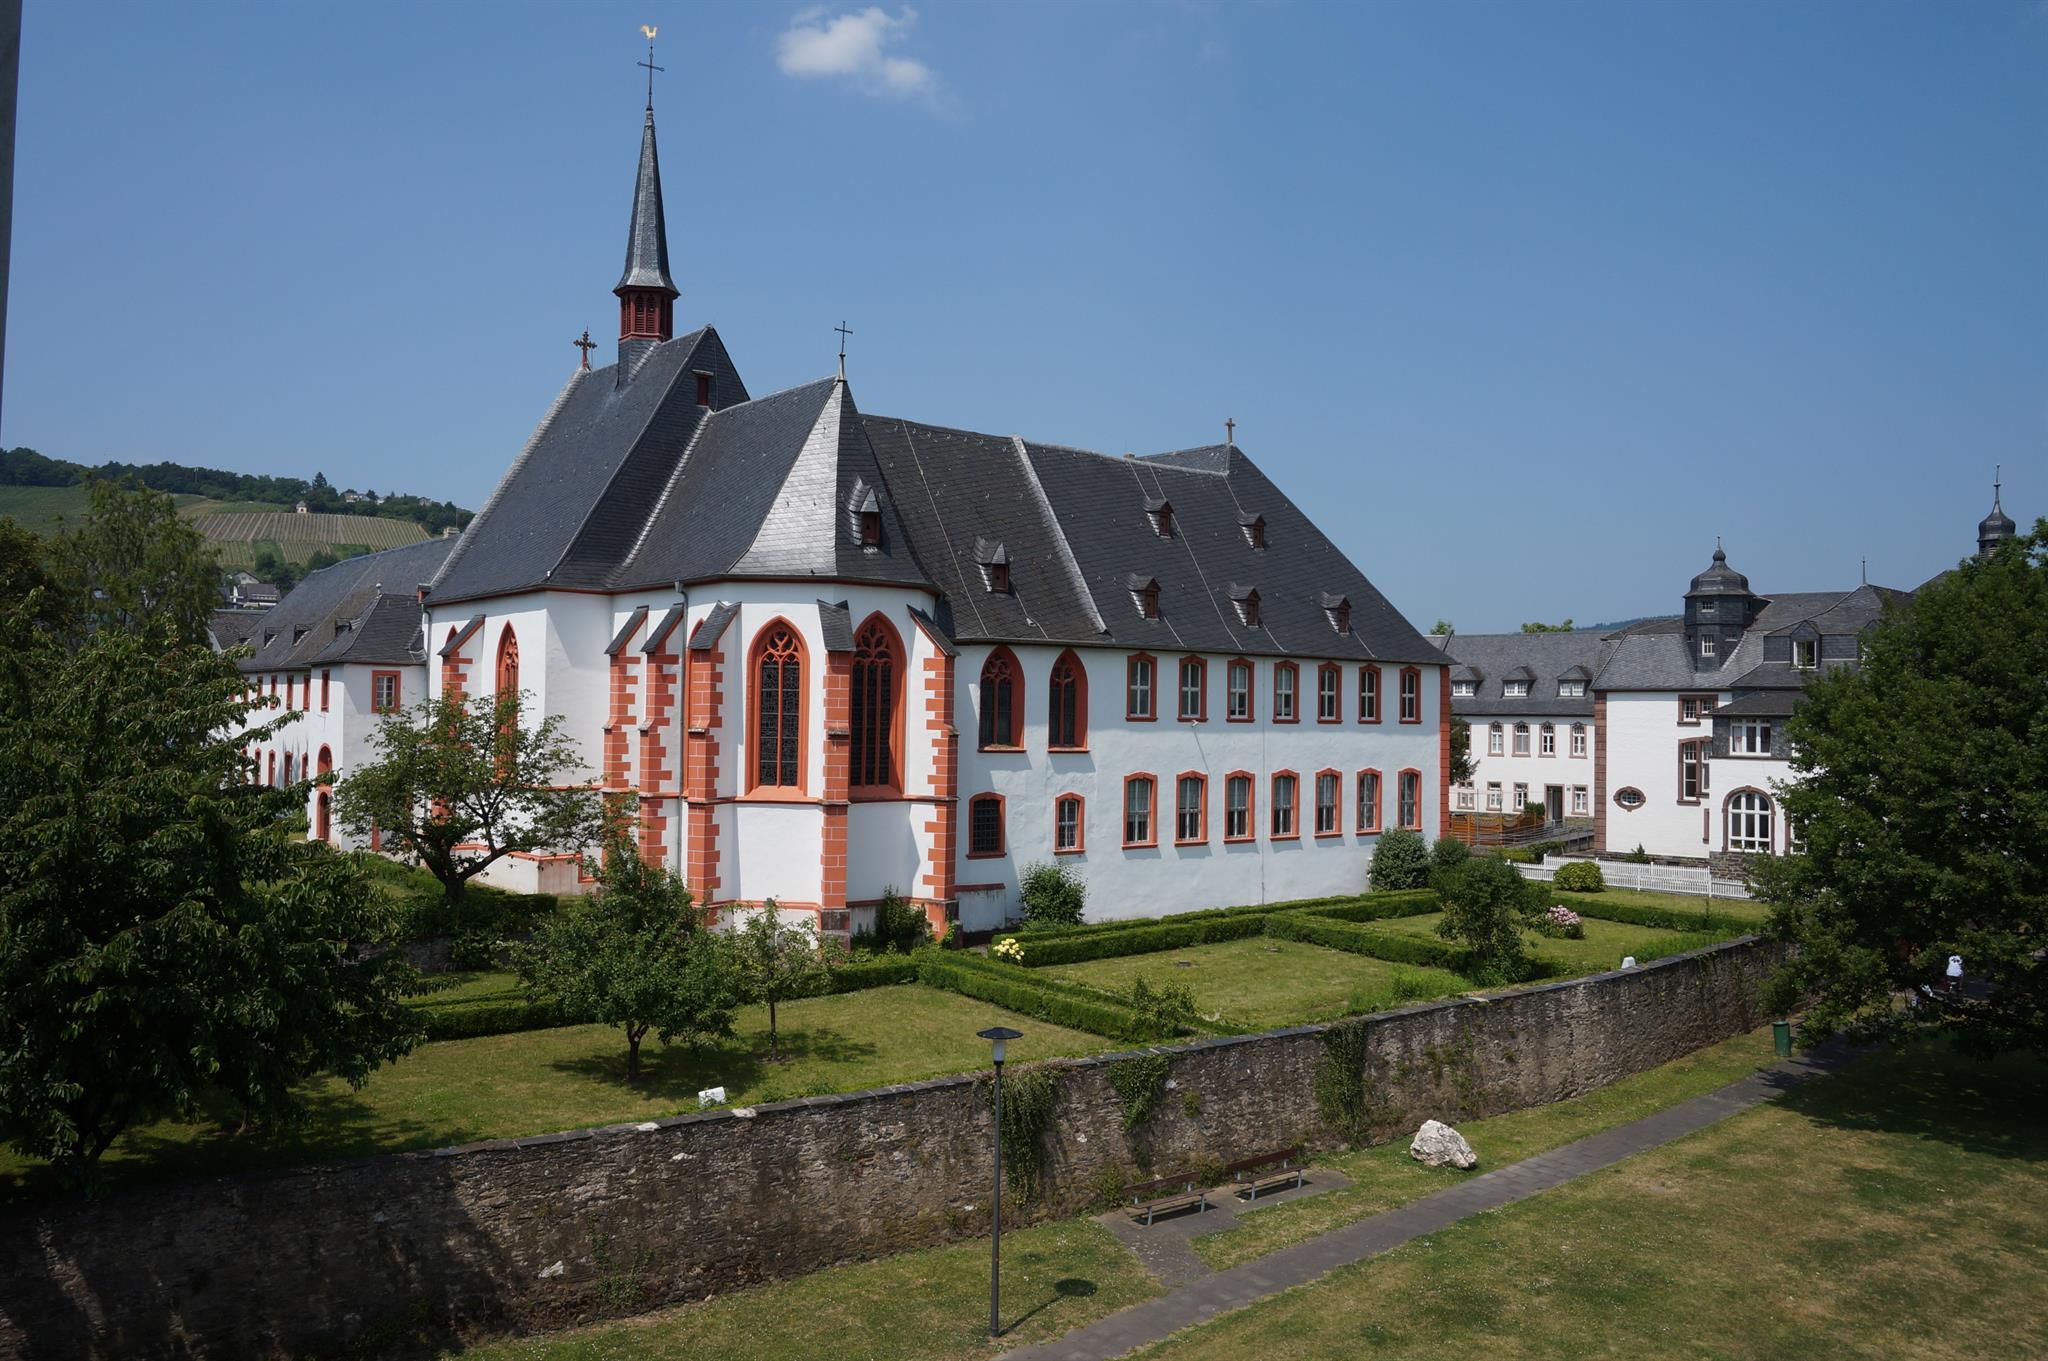 Friday guided tour at St. Nicholas Hospital/ Cusanusstift 2023